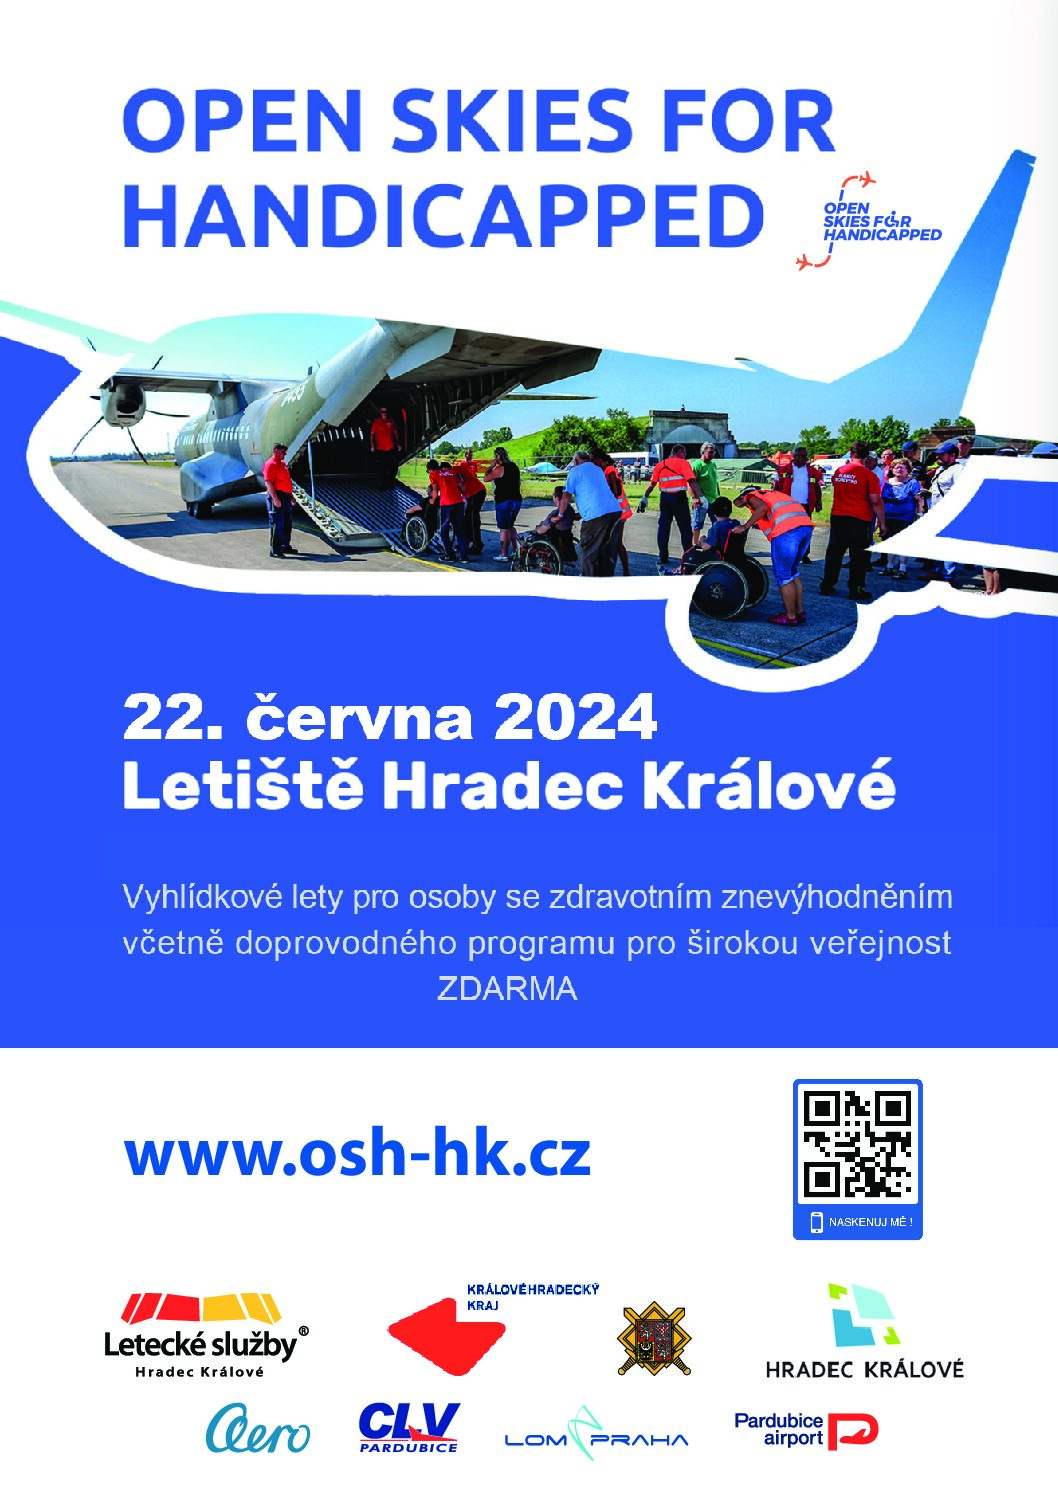 OPEN SKIES FOR HANDICAPPED 2024